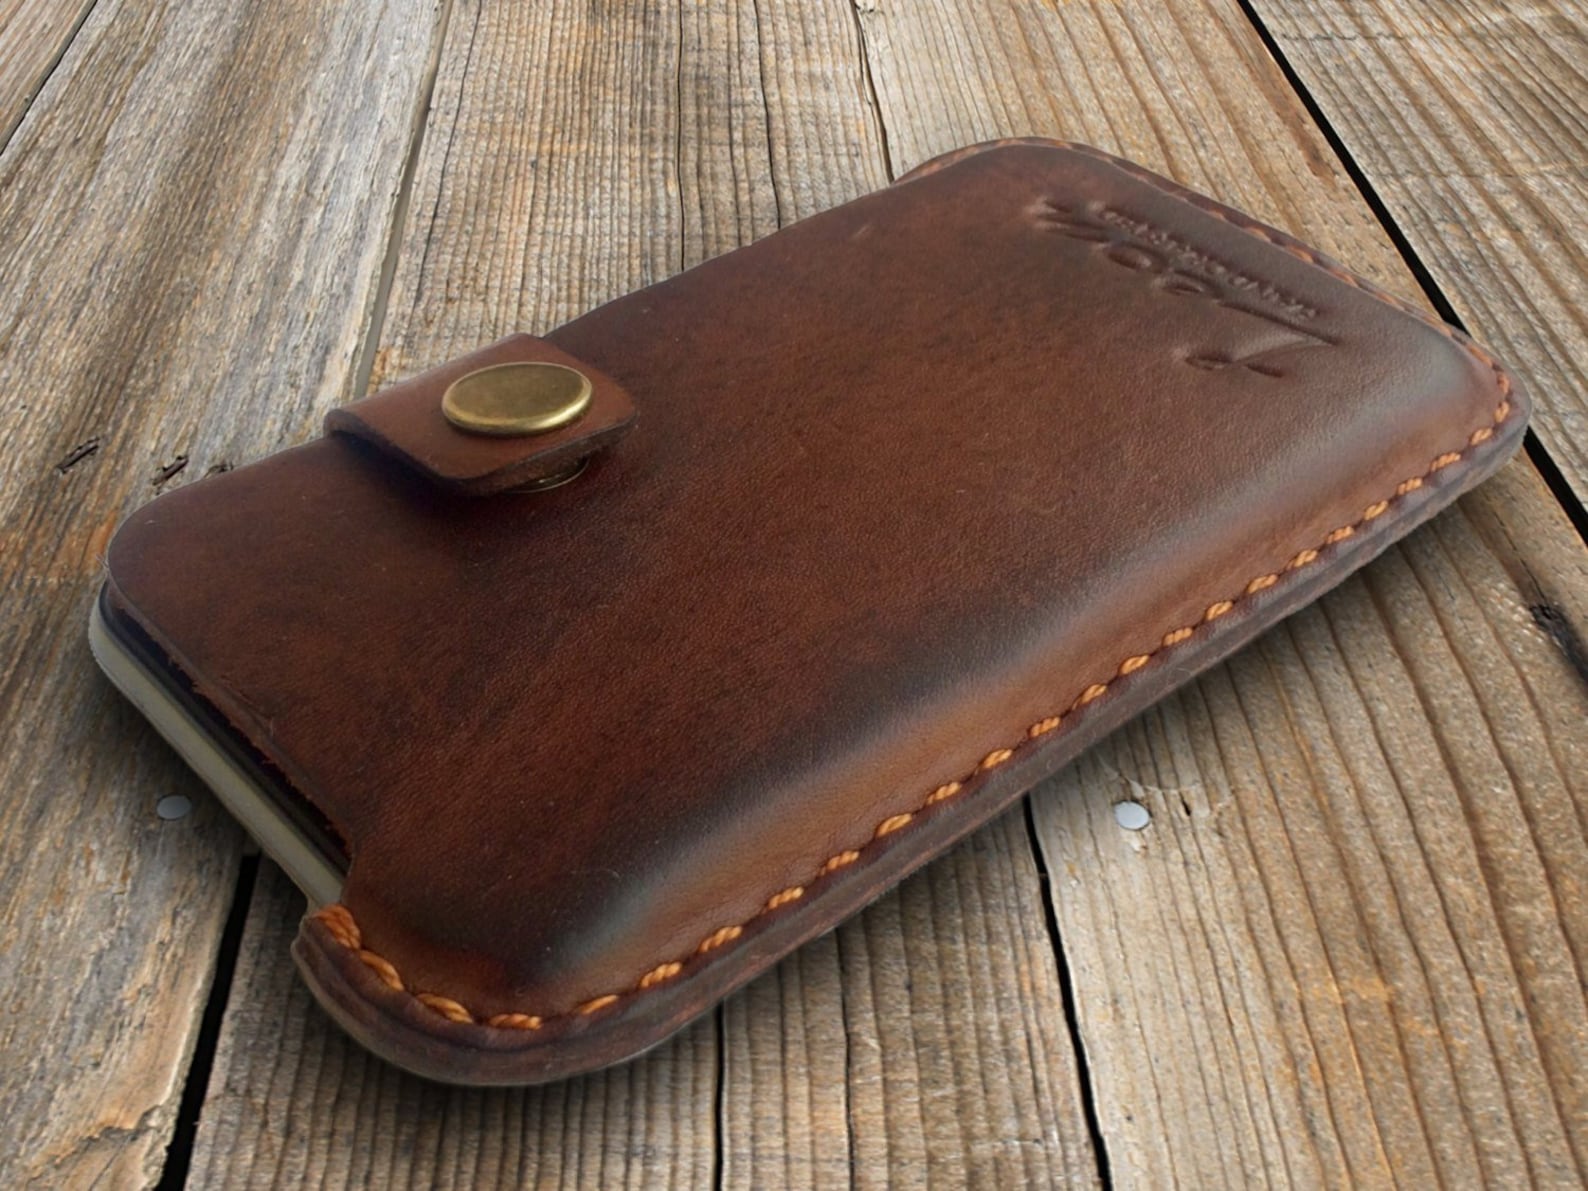 Heavy Duty Leather Smartphone Case Made of Genuine Leather - Etsy